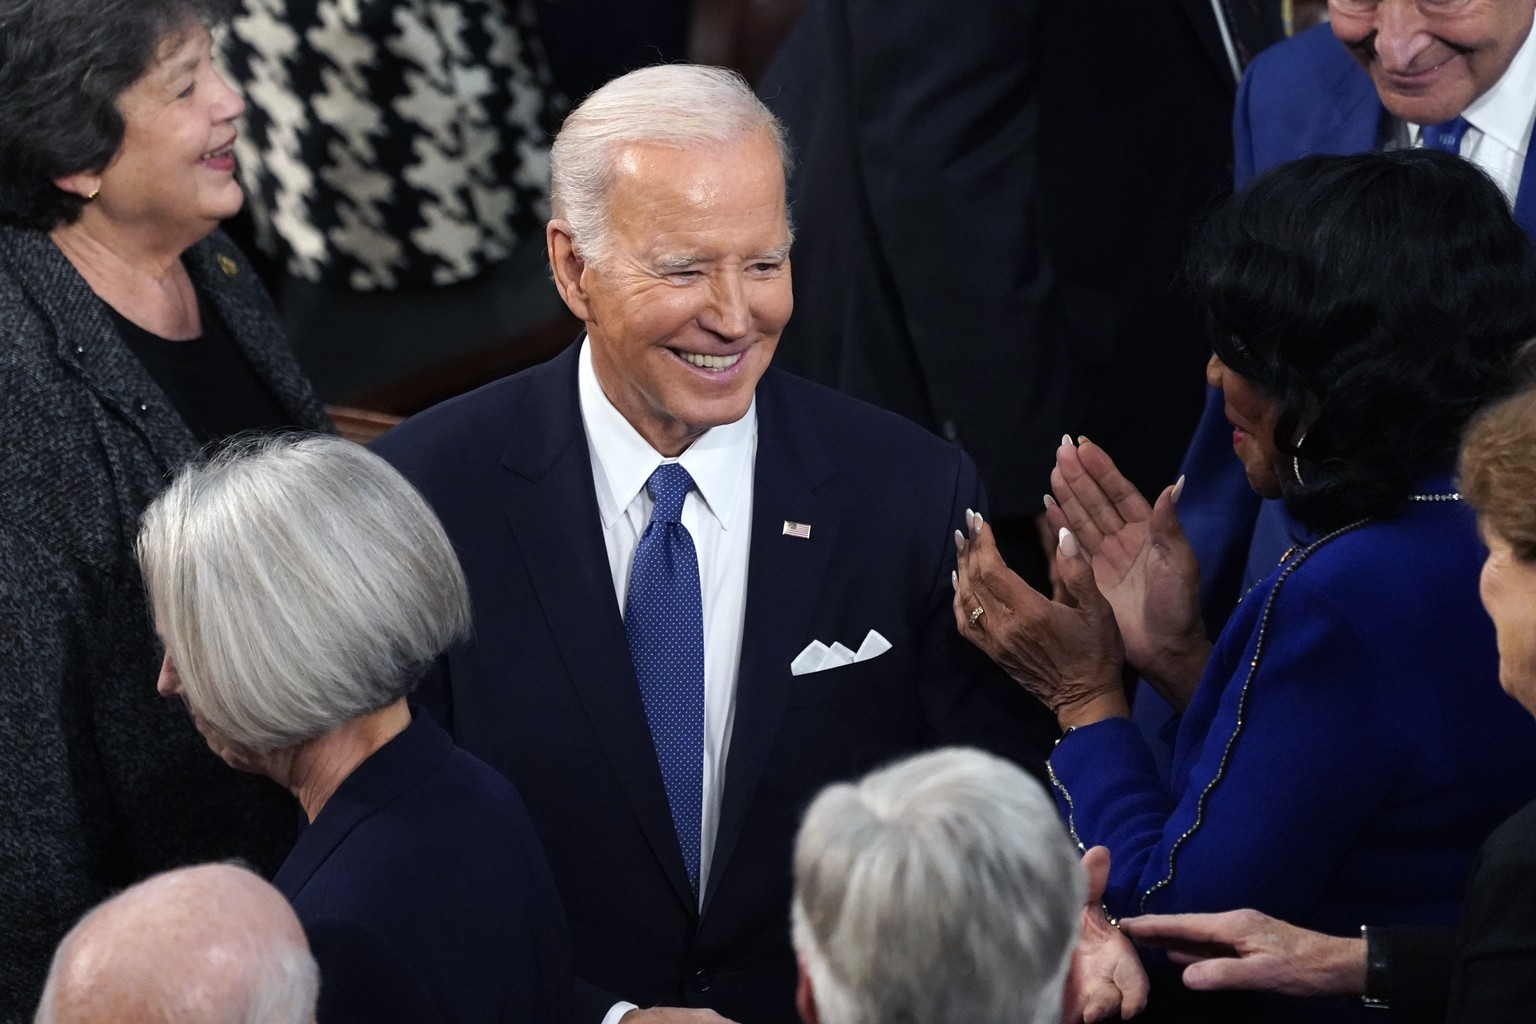 President Joe Biden arrives to deliver his State of the Union speech to a joint session of Congress, at the Capitol in Washington, Tuesday, Feb. 7, 2023. (AP Photo/J. Scott Applewhite)
Joe Biden